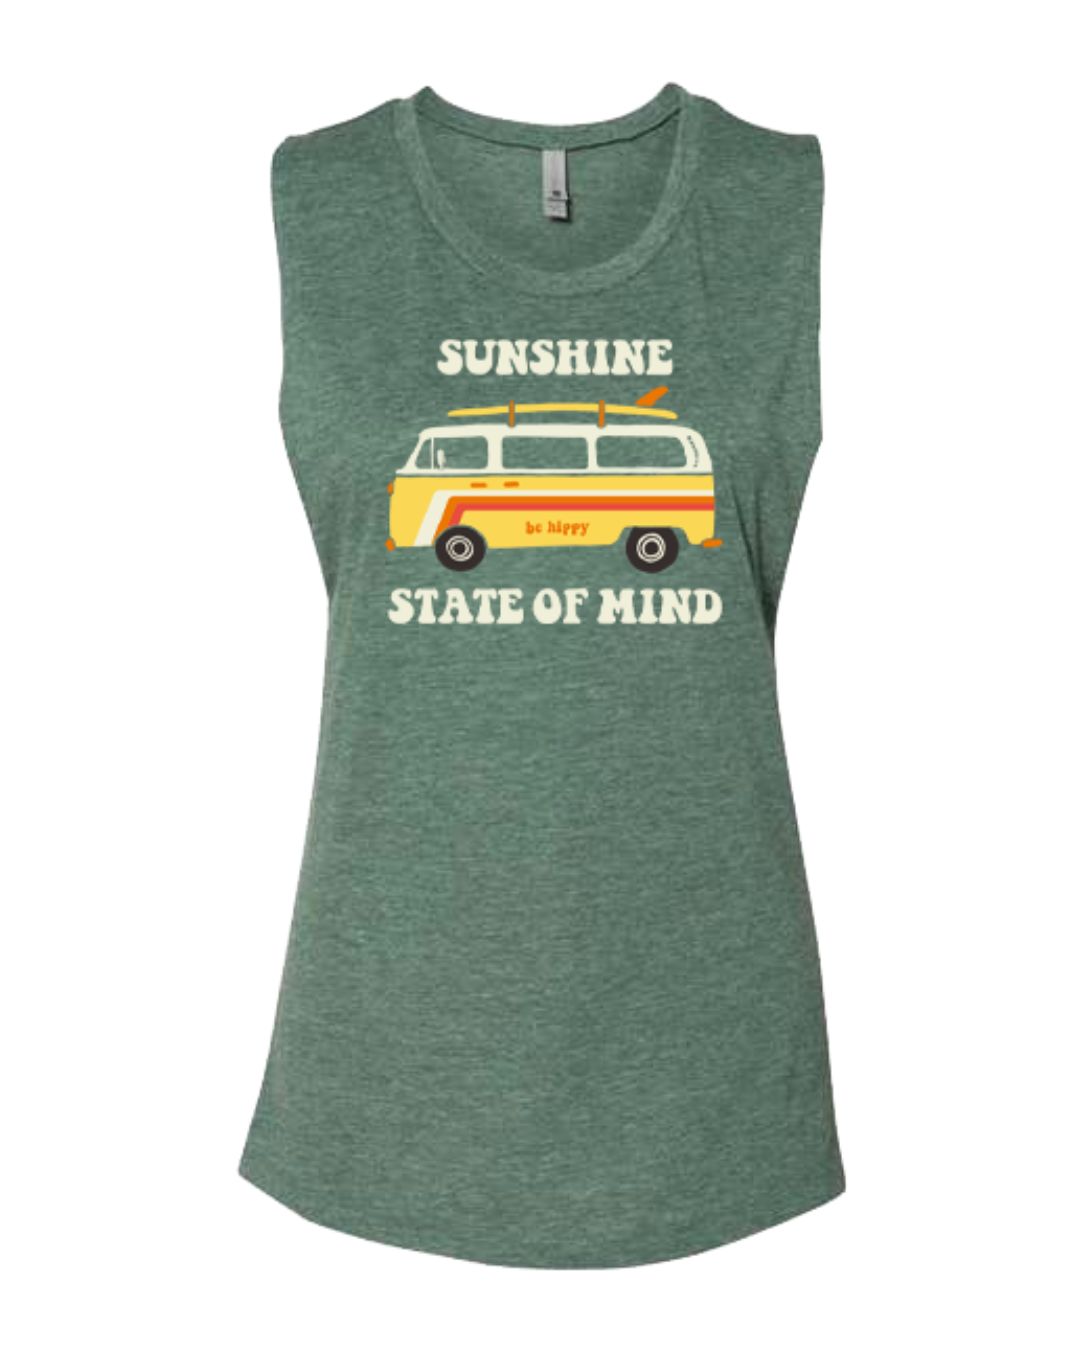 Sunshine State of Mind Muscle Tee